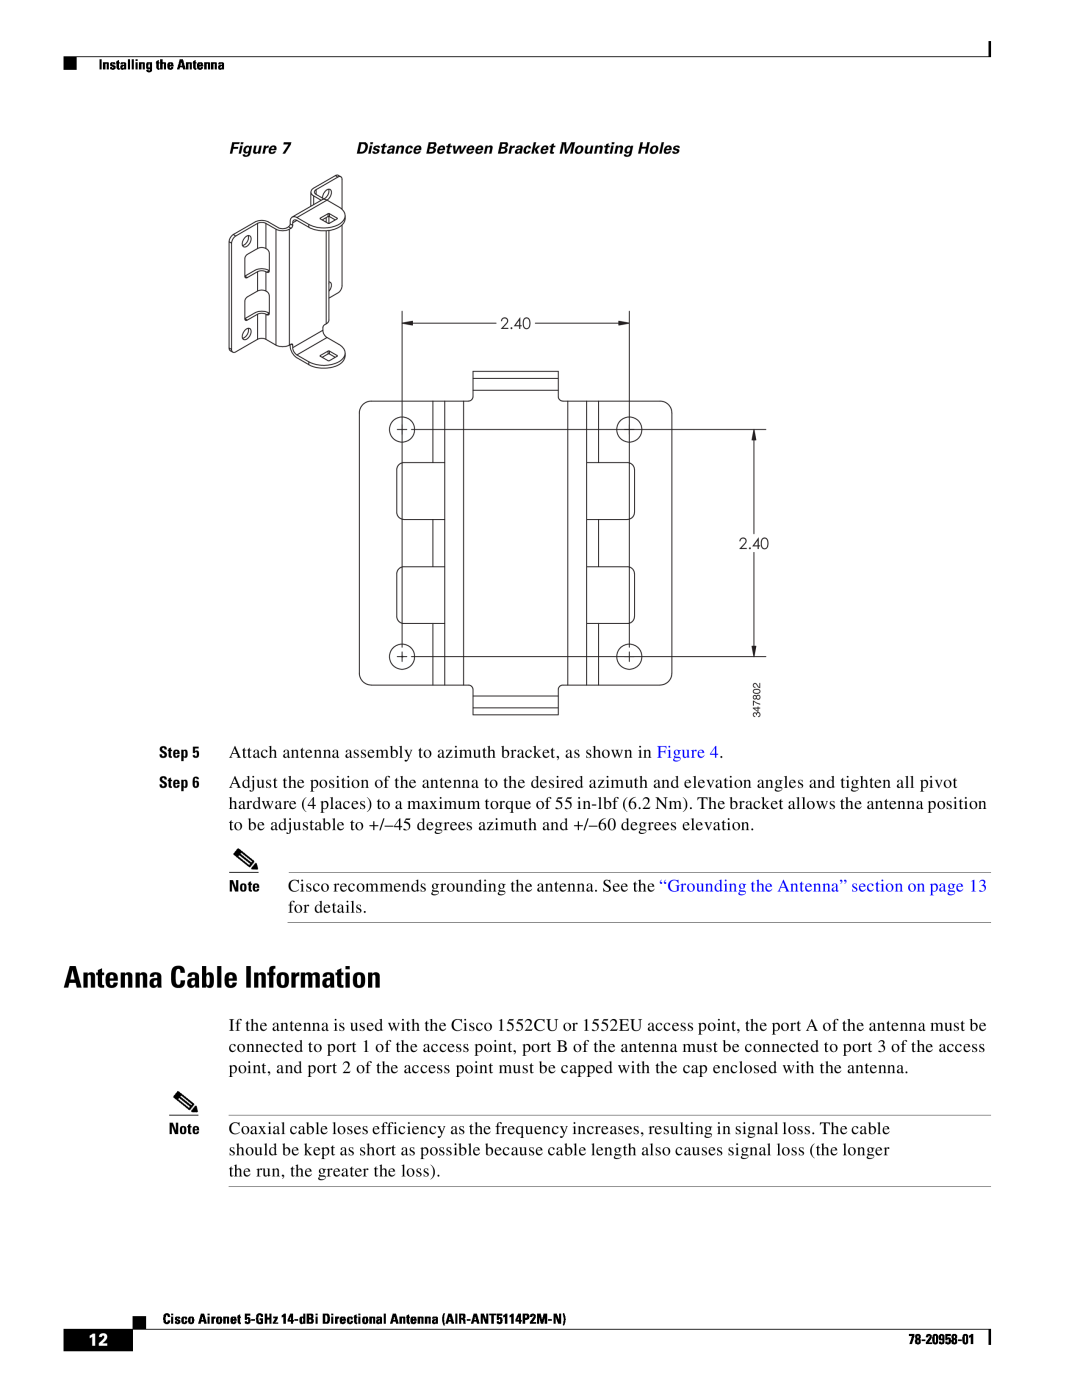 Cisco Systems AIRANT5114P2MN specifications Antenna Cable Information, Distance Between Bracket Mounting Holes 